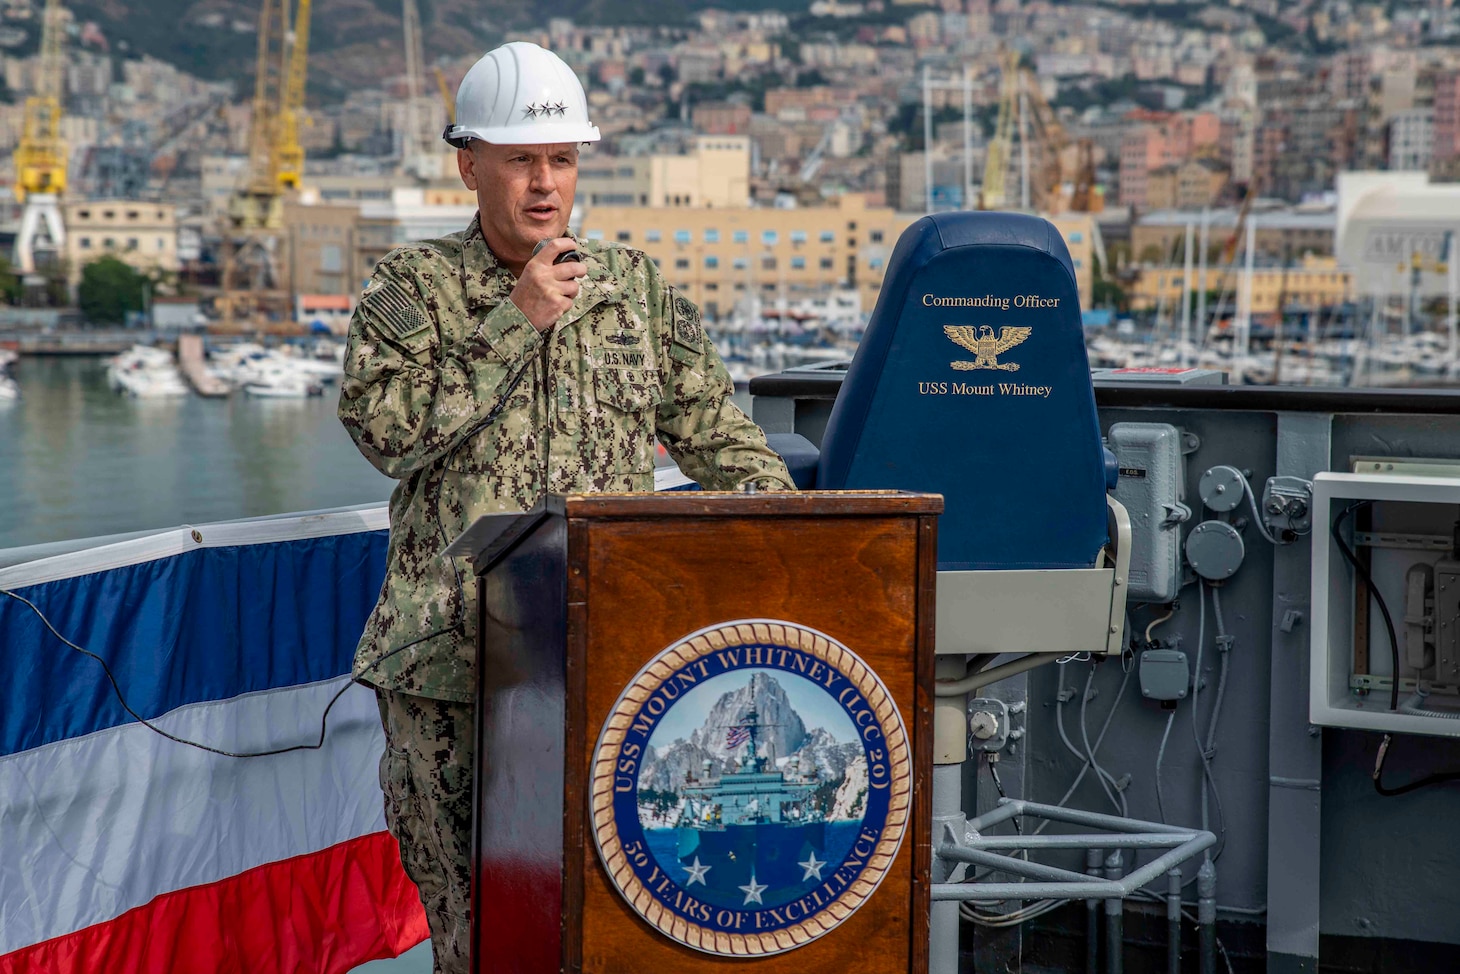 (Aug 31, 2021) Vice Adm. Gene Black, commander, U.S. Sixth Fleet, speaks during the change of command of the Blue Ridge-class command and control ship USS Mount Whitney (LCC 20) in San Giorgio Del Porto in Genoa, Italy, August, 31, 2021.  Mount Whitney, the U.S. Sixth Fleet flagship, homeported in Gaeta, Italy entered its regularly scheduled overhaul to make improvements in order to increase the security and stability of the U.S. Sixth Fleet area of operations.